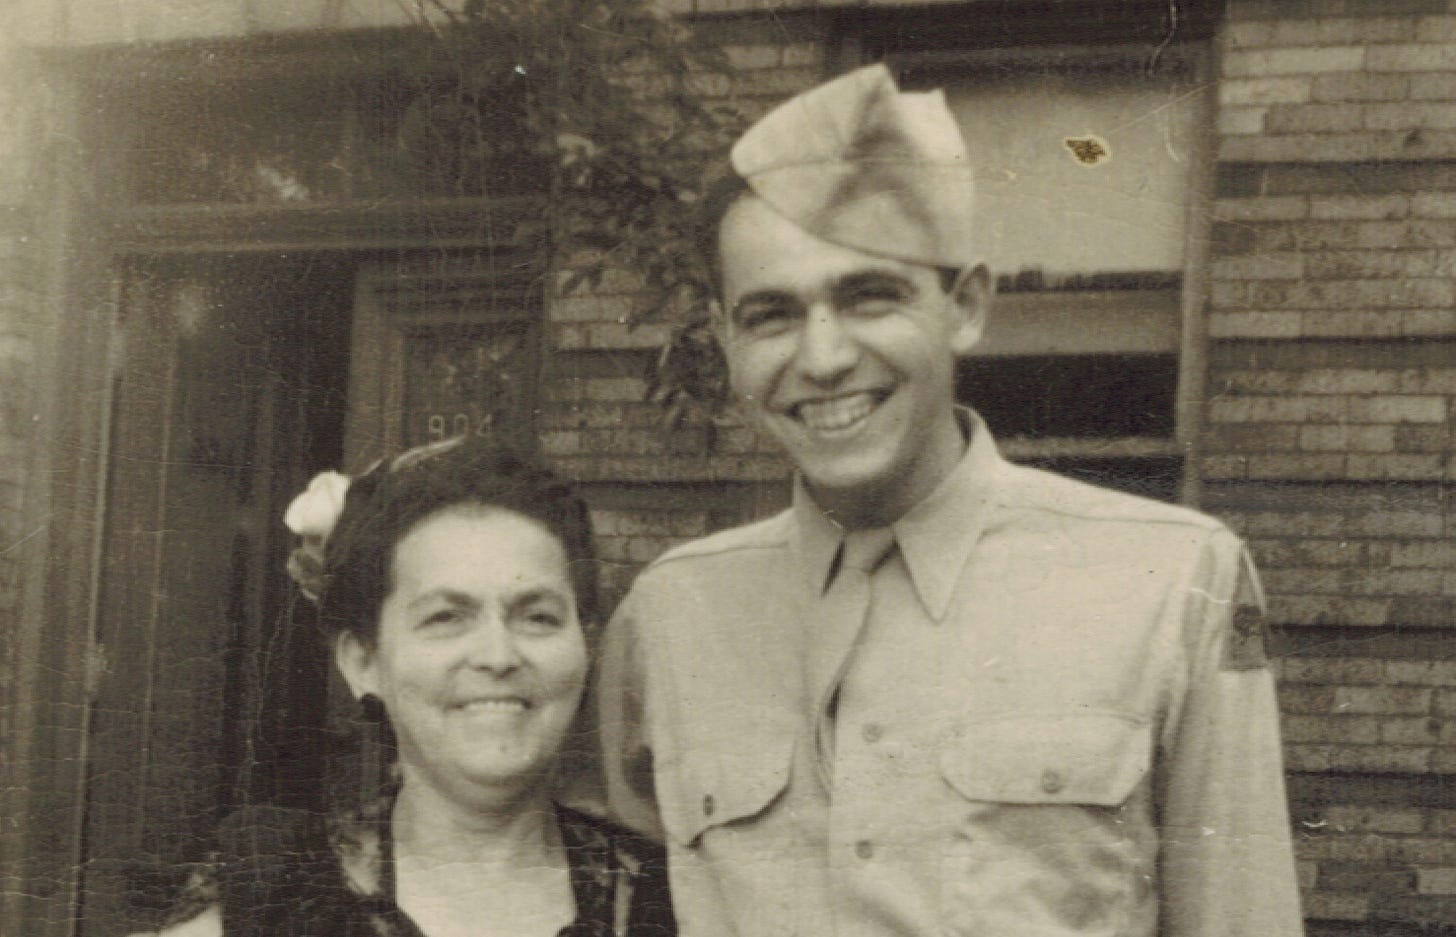 A picture of Irv in uniform next to his mom, circa 1944/45